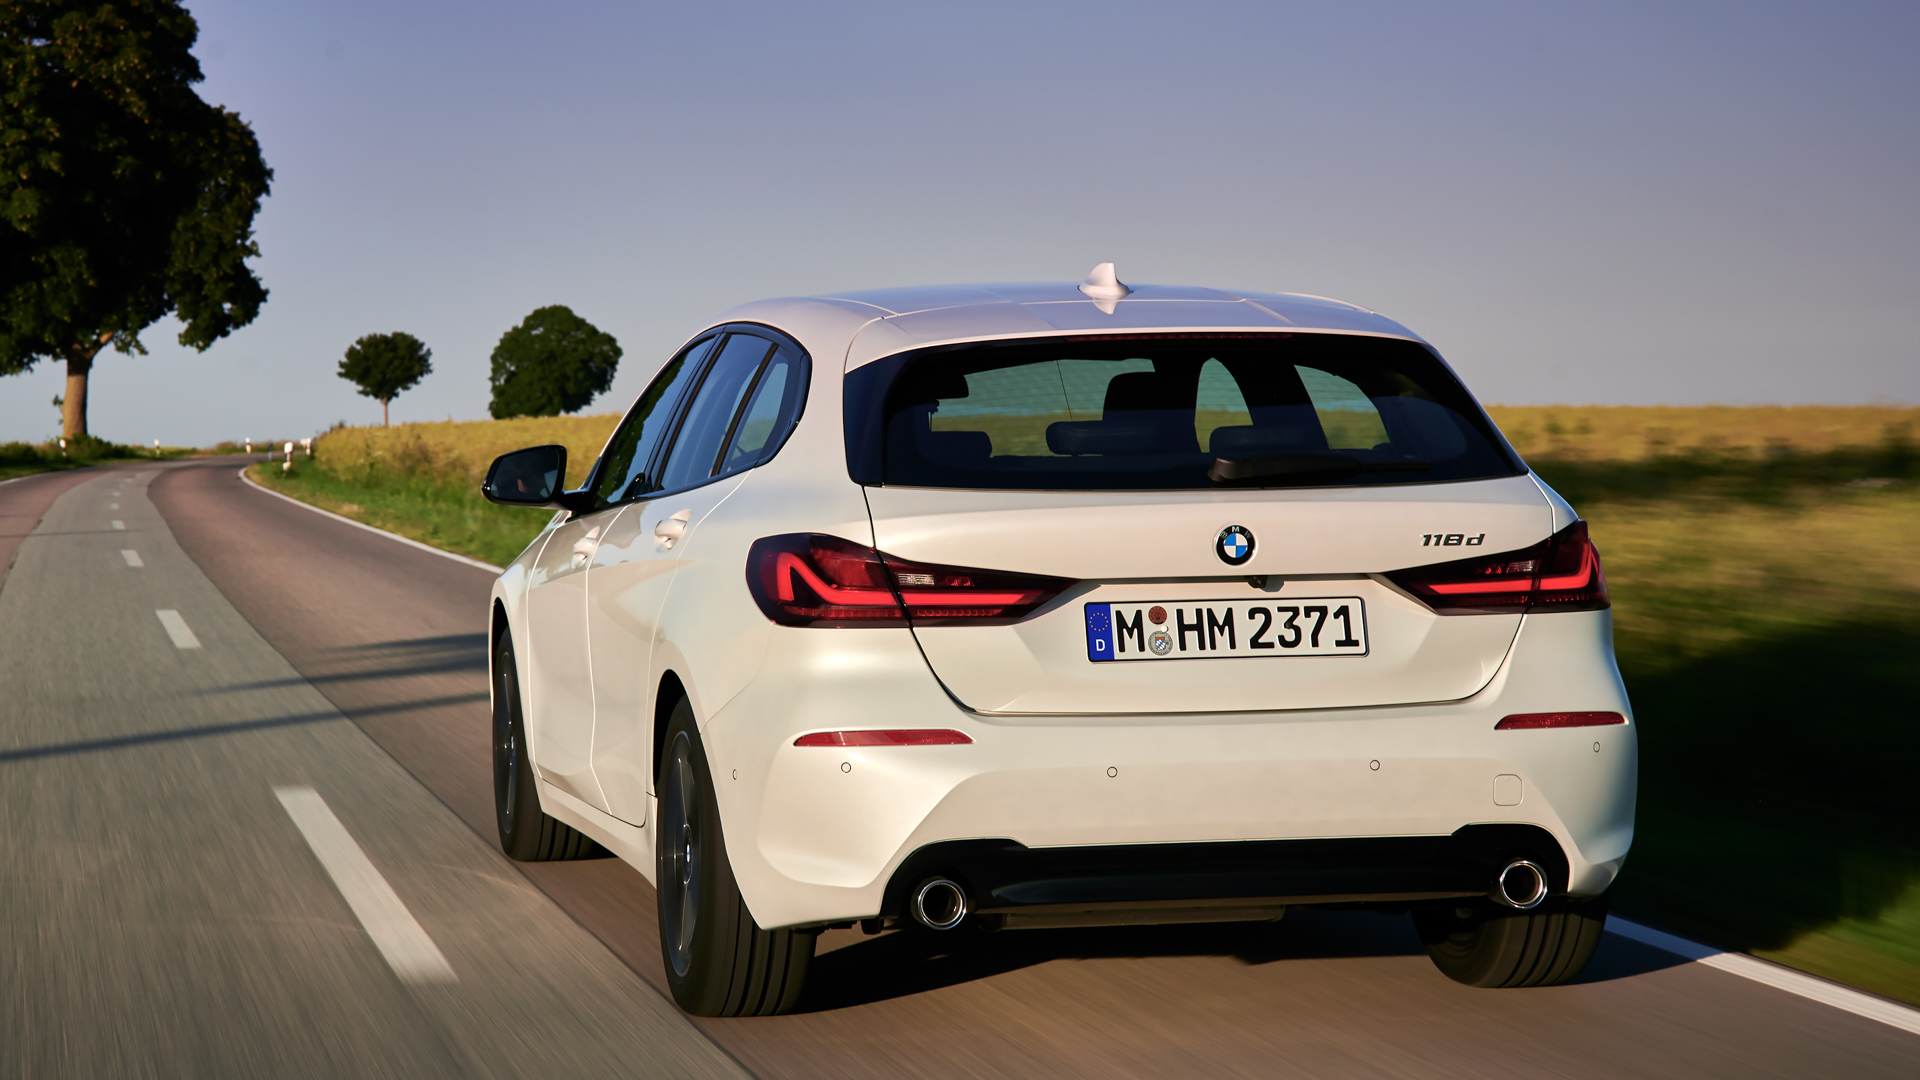 Video: BMW F20 1 Series reviewed against the W176 A-Class